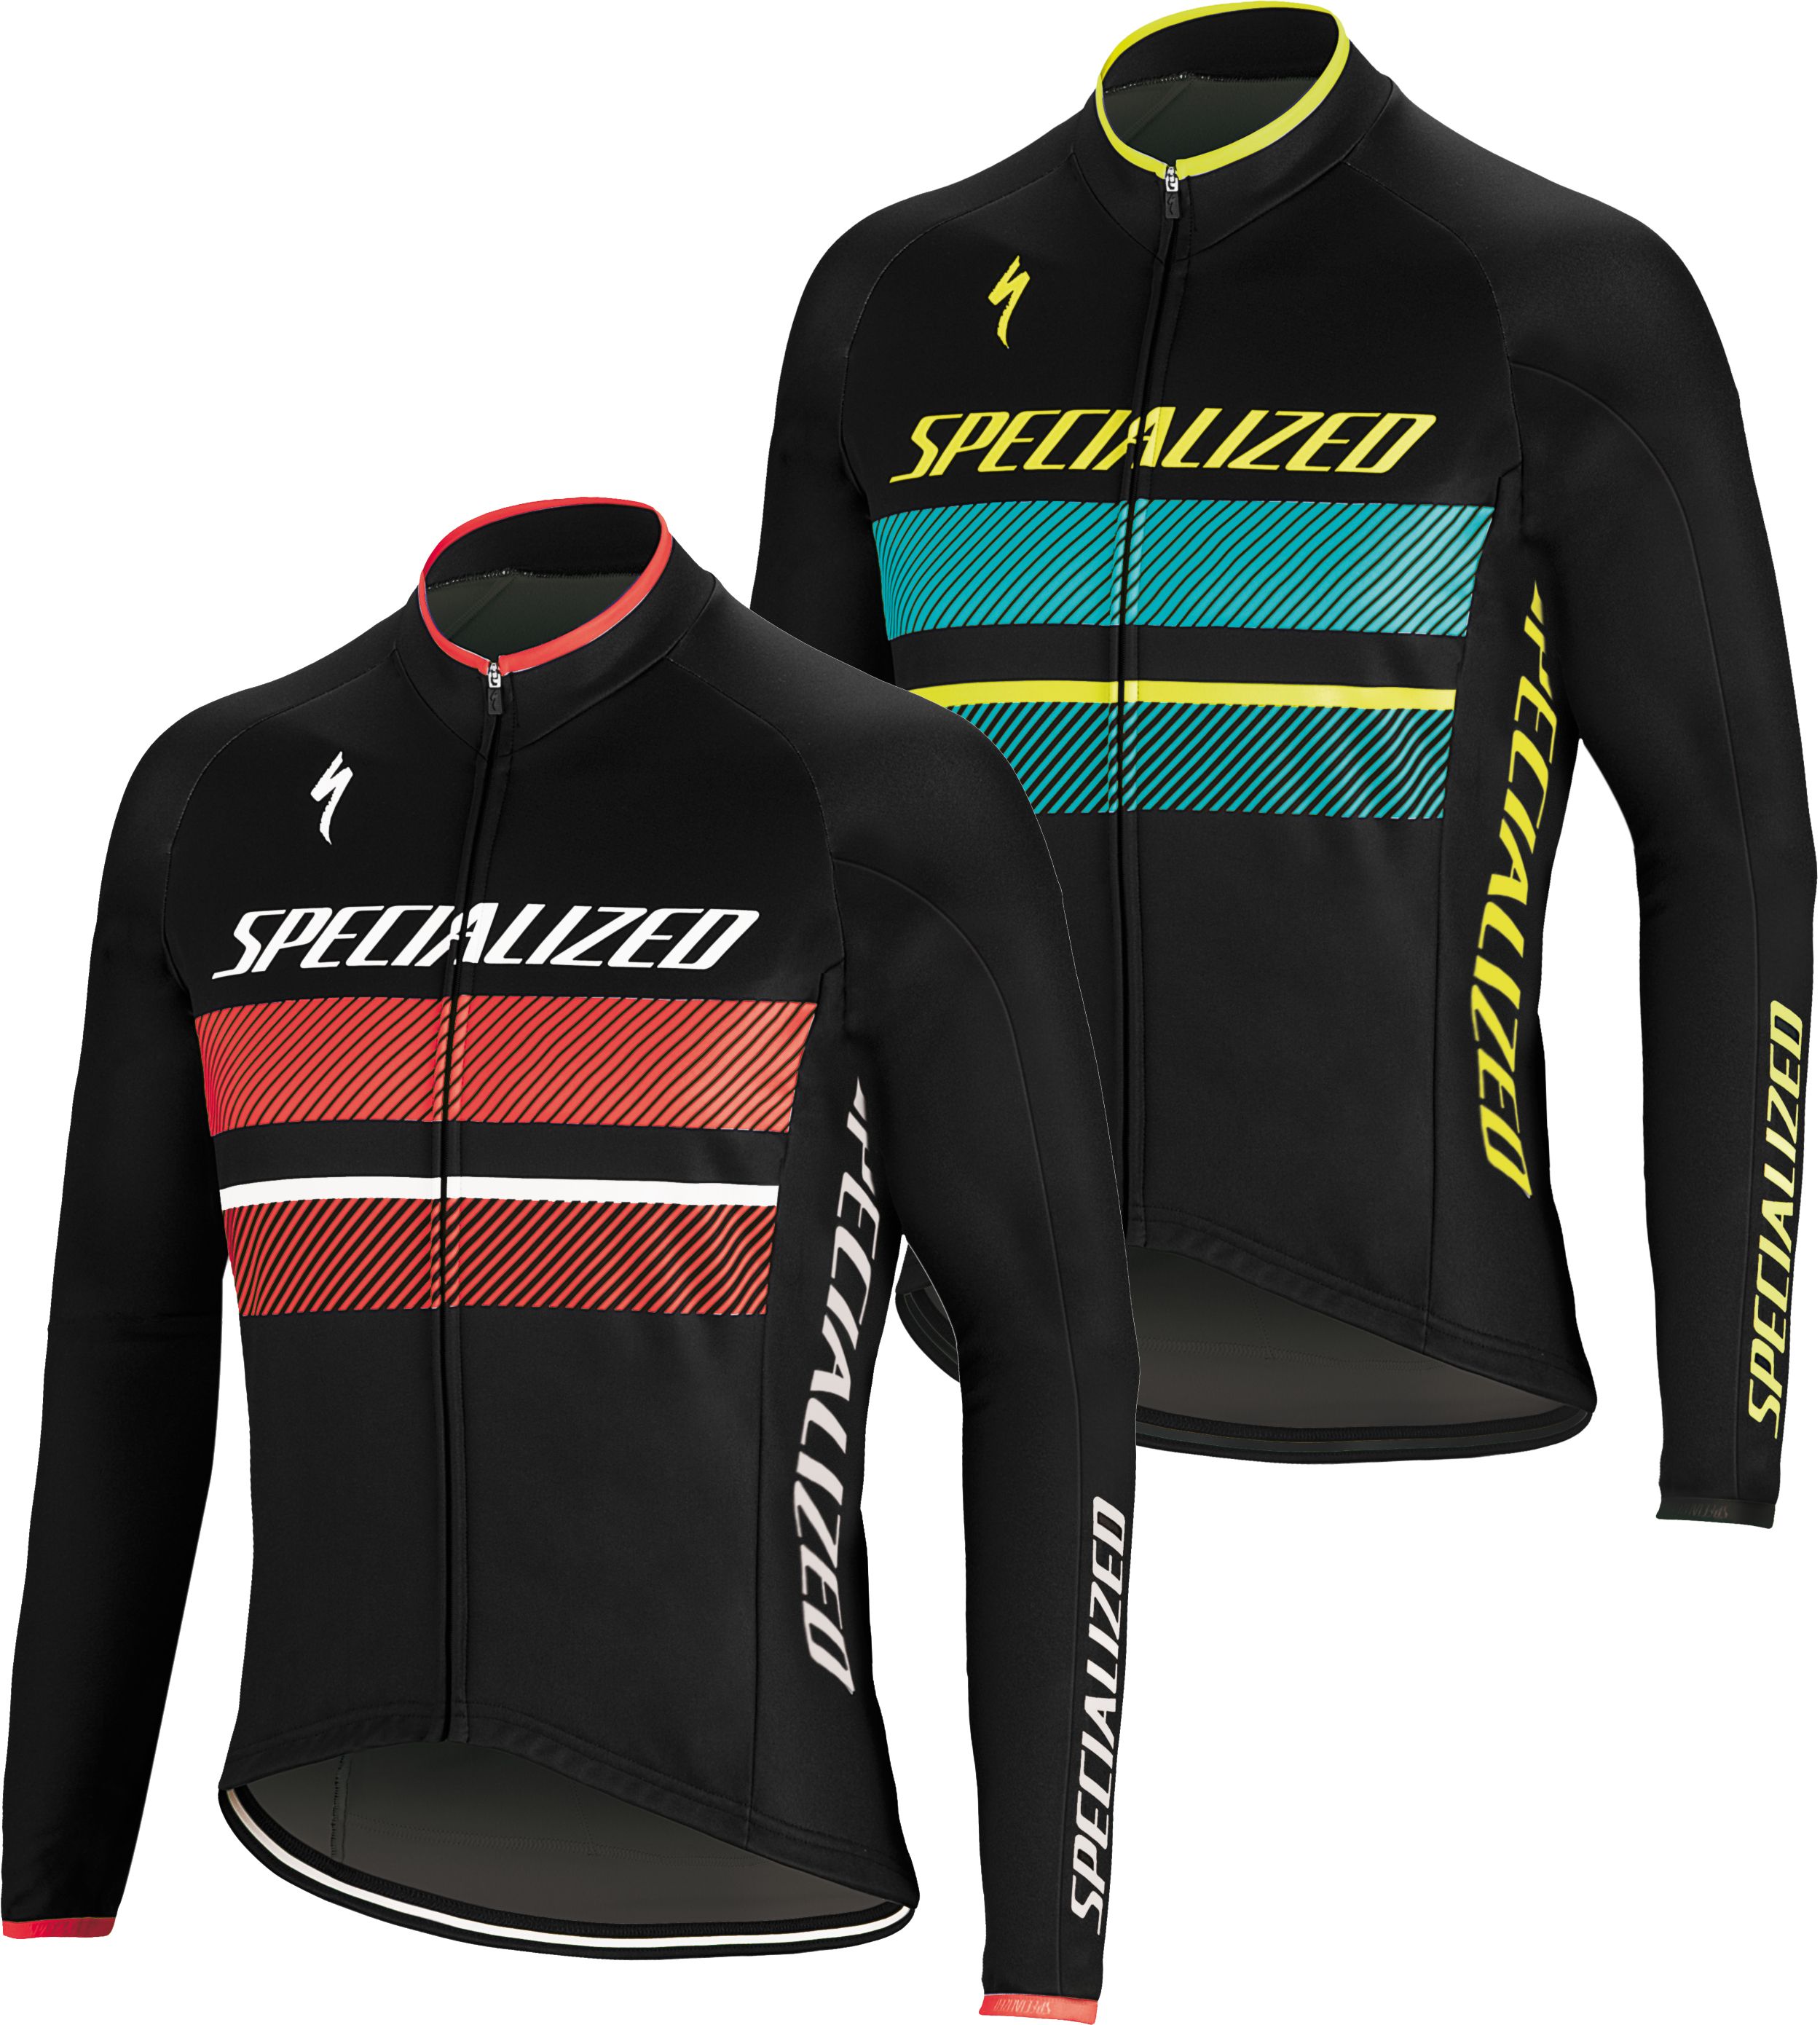 Specialized WR Element Rbx Comp Logo Long Sleeve Jersey 2019 - £47.98 ...